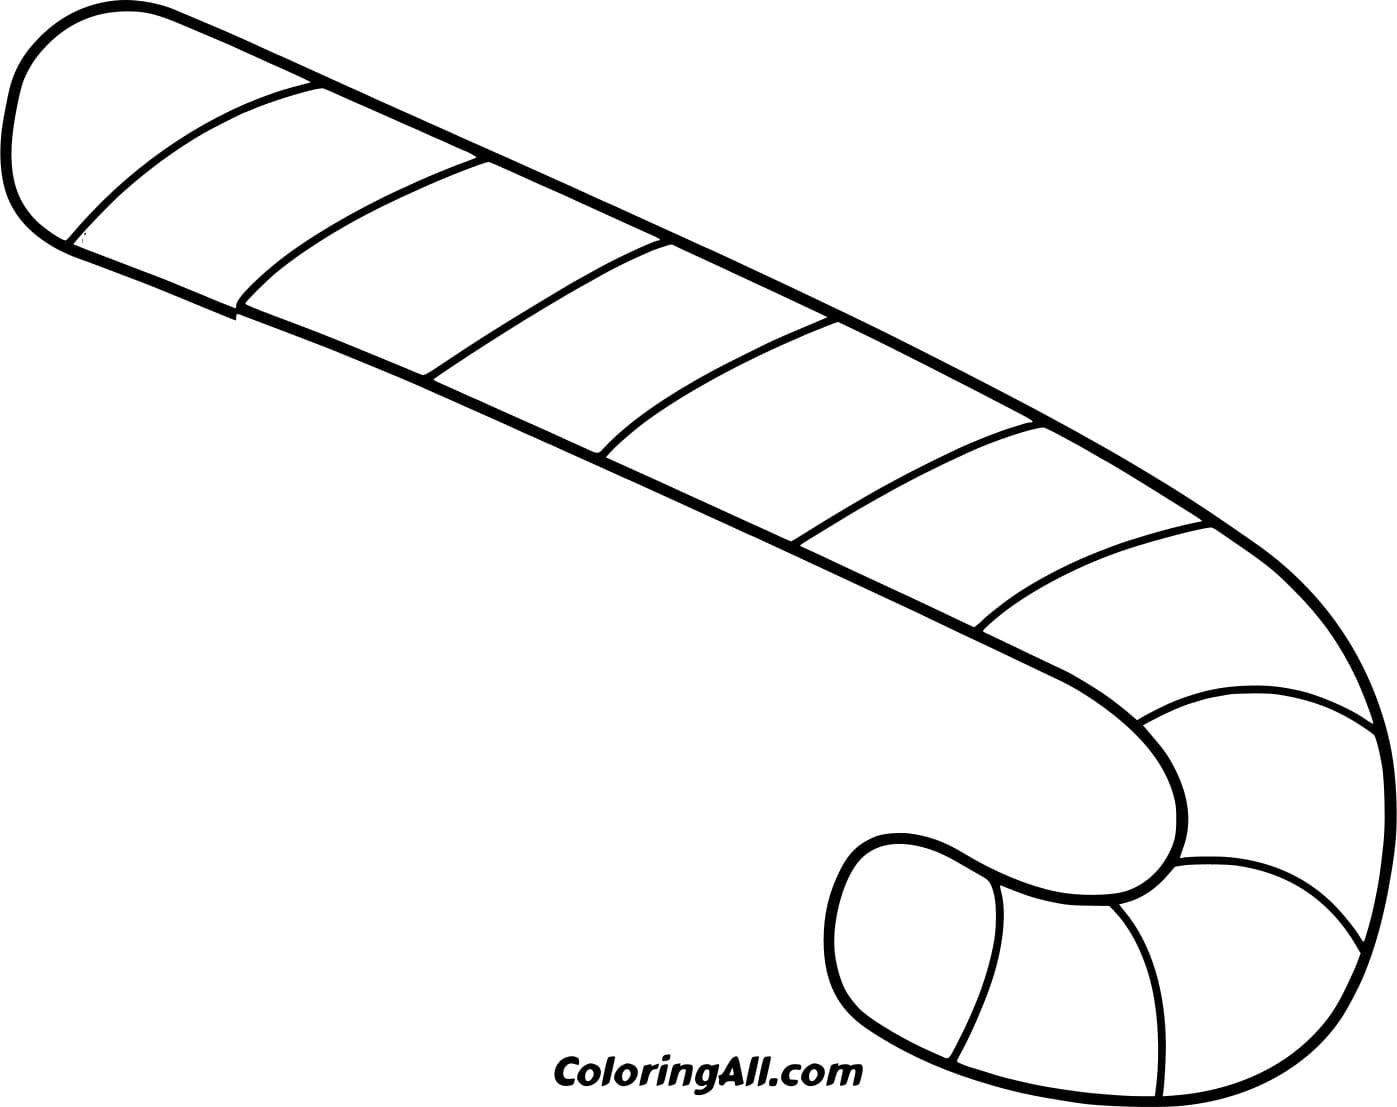 Simple Sideways Candy Cane Image For Kids Coloring Page